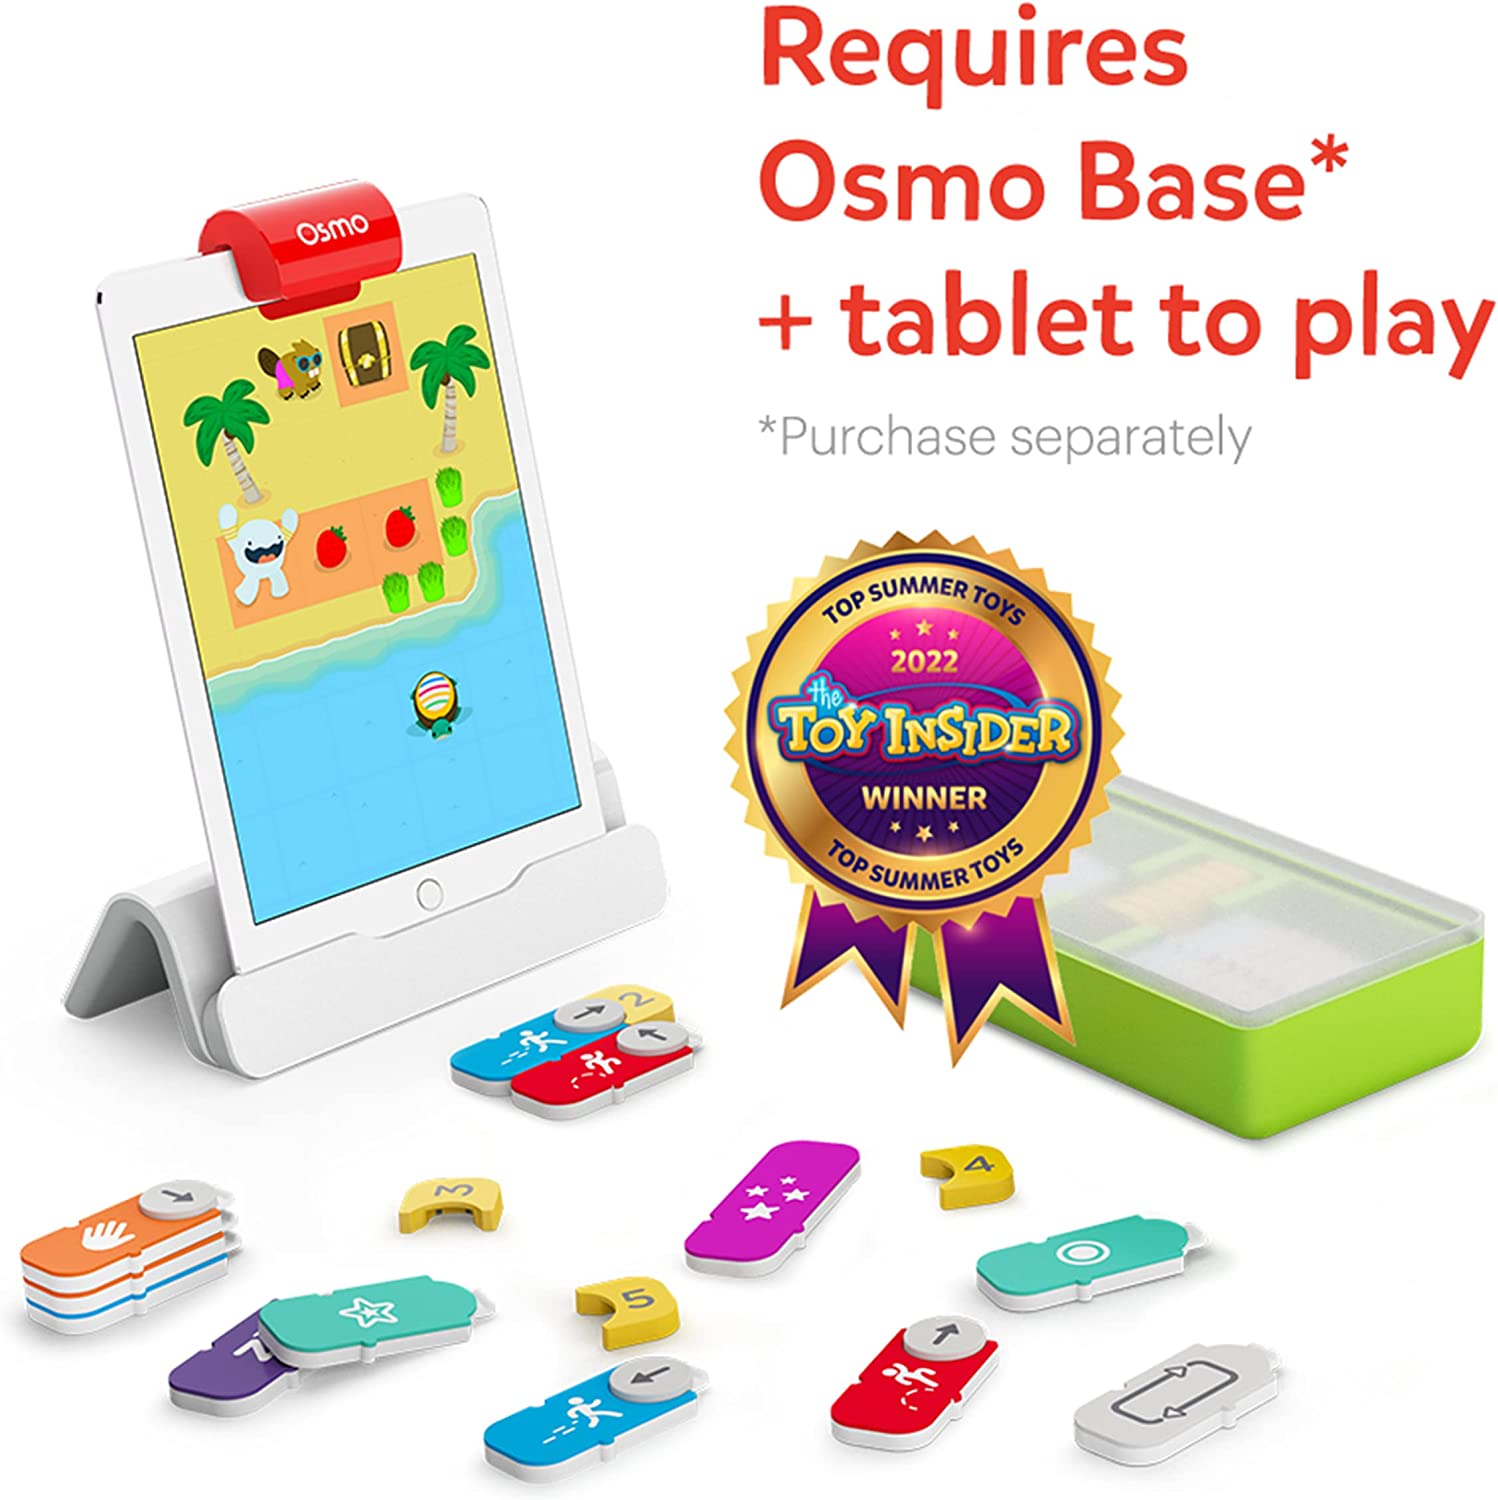 Coding Family Bundle for iPhone, iPad & Fire Tablet - 3 Educational Learning Games - Ages 5-10+ - Coding Jam, Coding Awbie, Coding Duo - STEM Toy ( Base Required) (Amazon Exclusive)